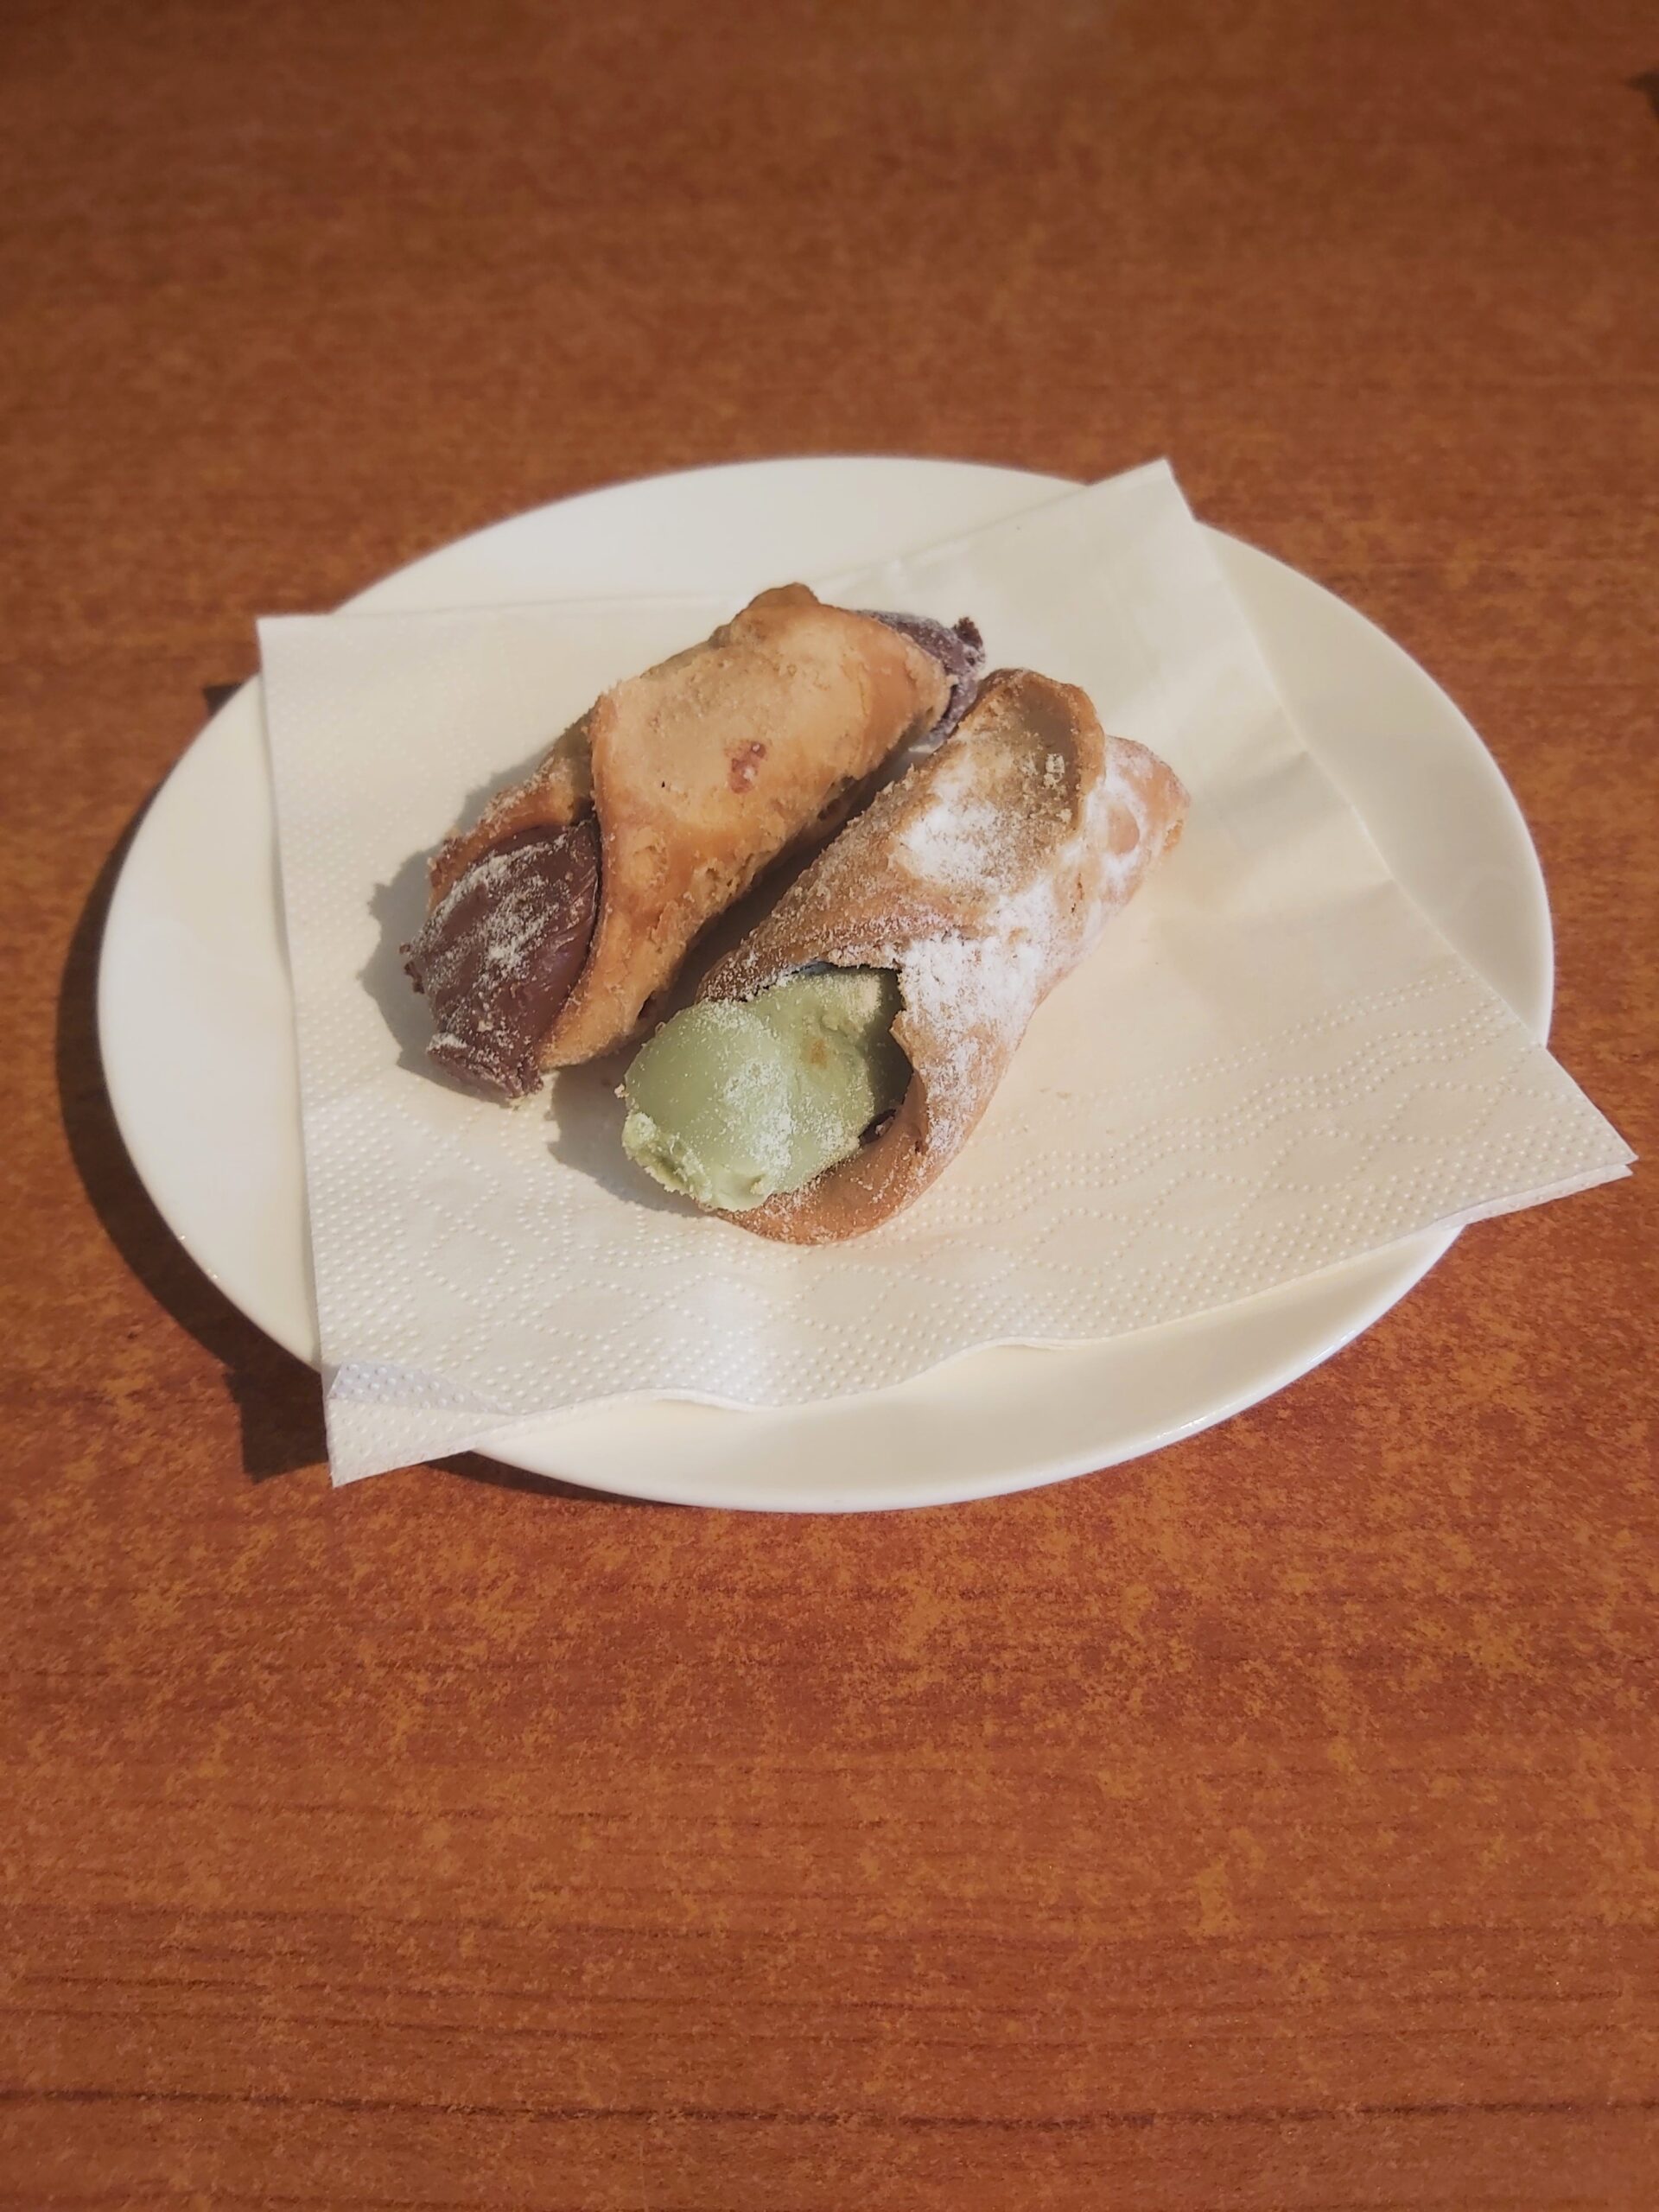 Cannoli at Milady Cafe in Ware, England